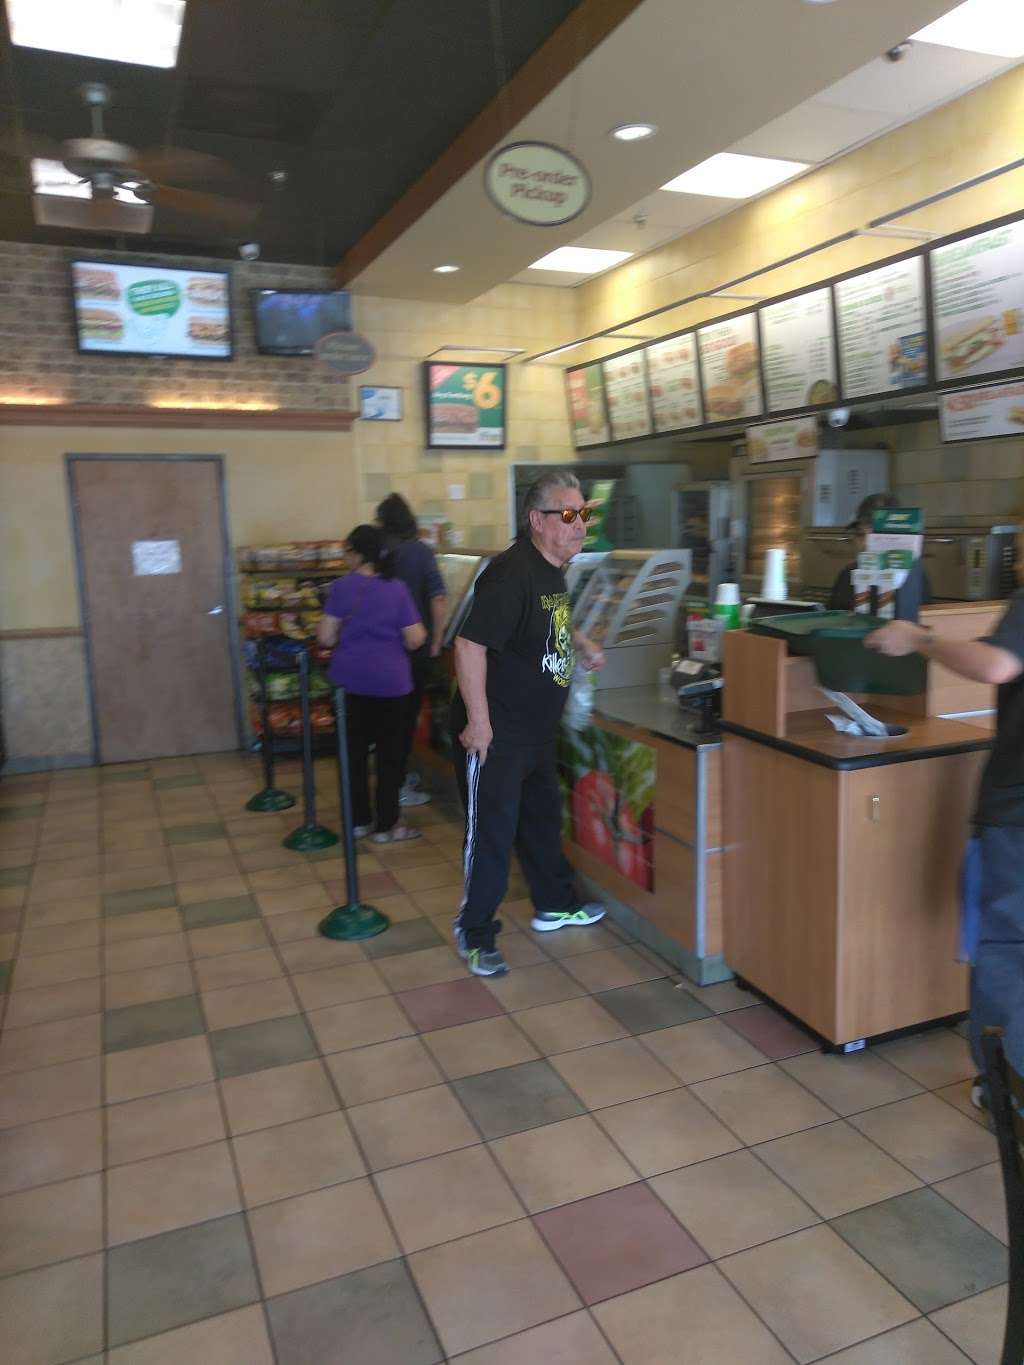 Subway | The Quad at Whittier, 8330 Painter Ave Unit C-2, Whittier, CA 90602 | Phone: (562) 945-7827